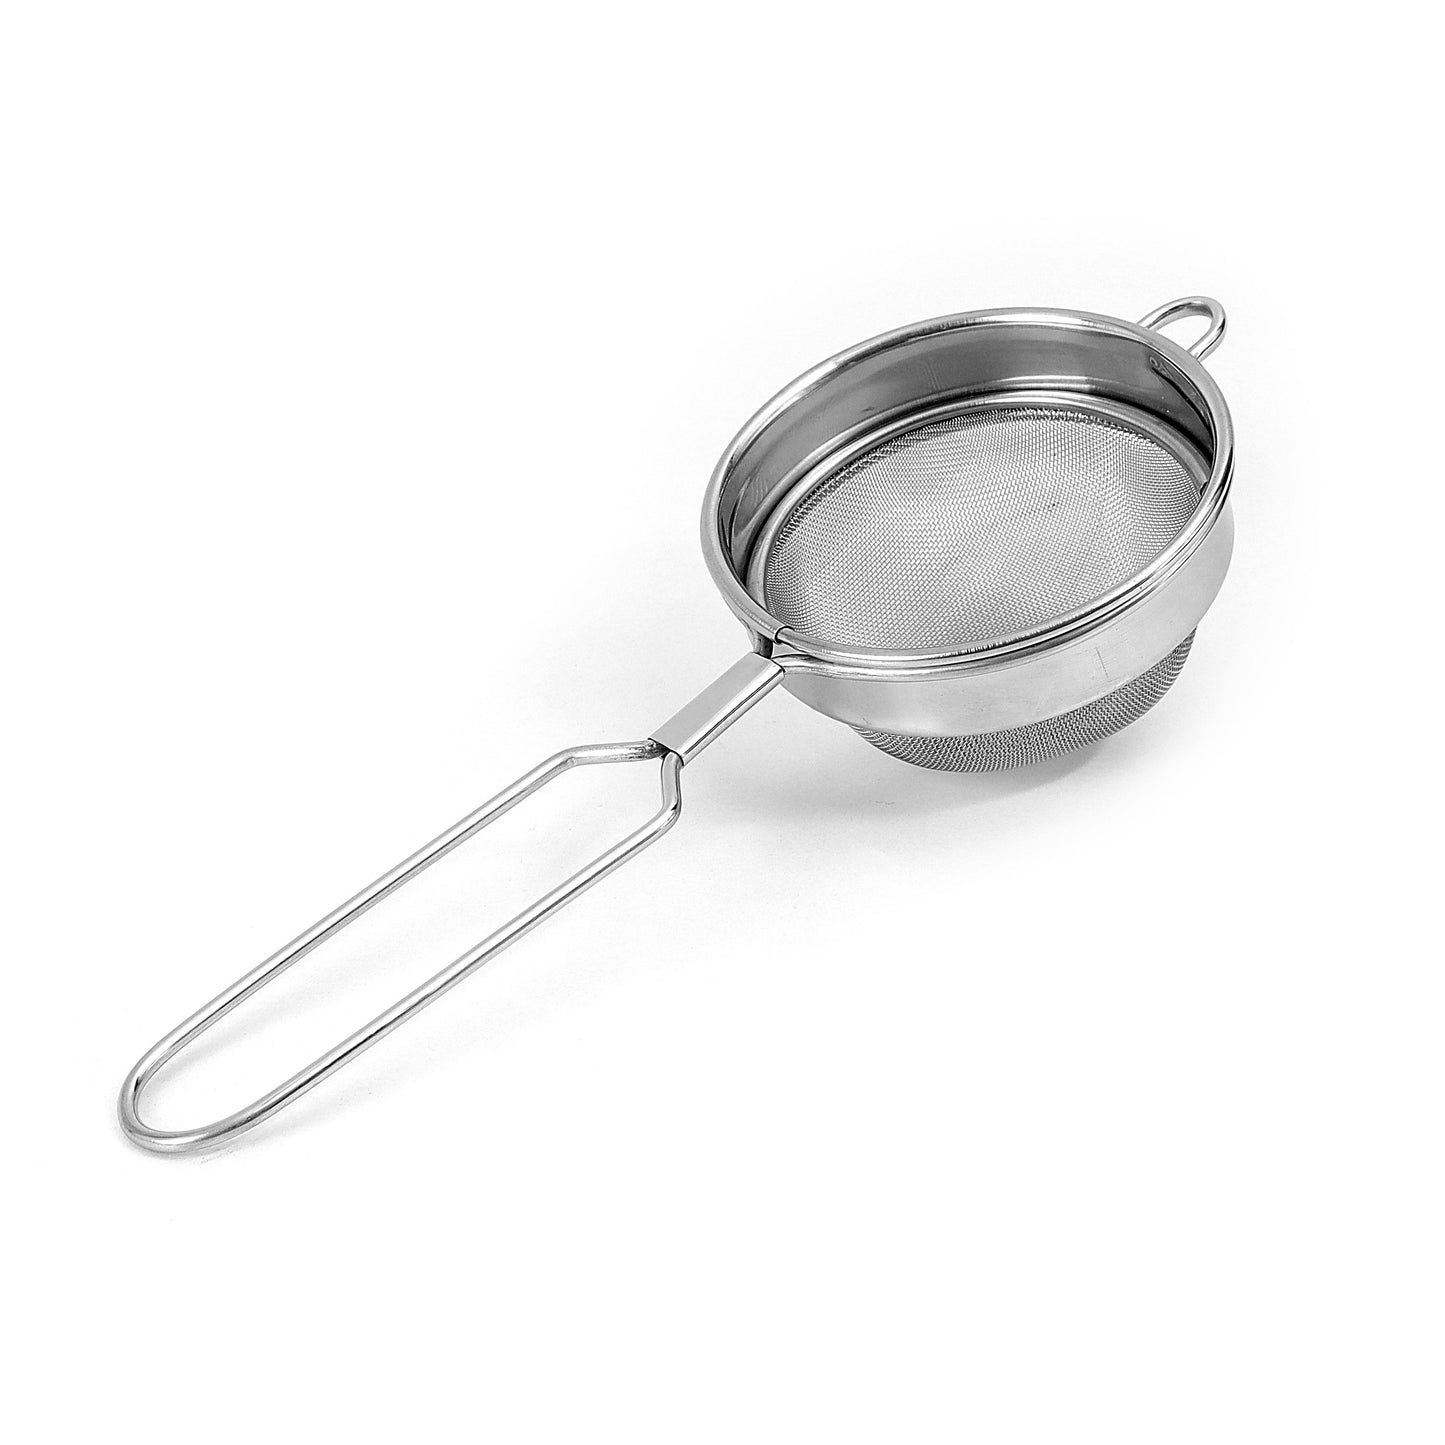 Deluxe Stainless Steel Chai Channi with Ergonomic Wire Handle High Quality Kitchen Sieve